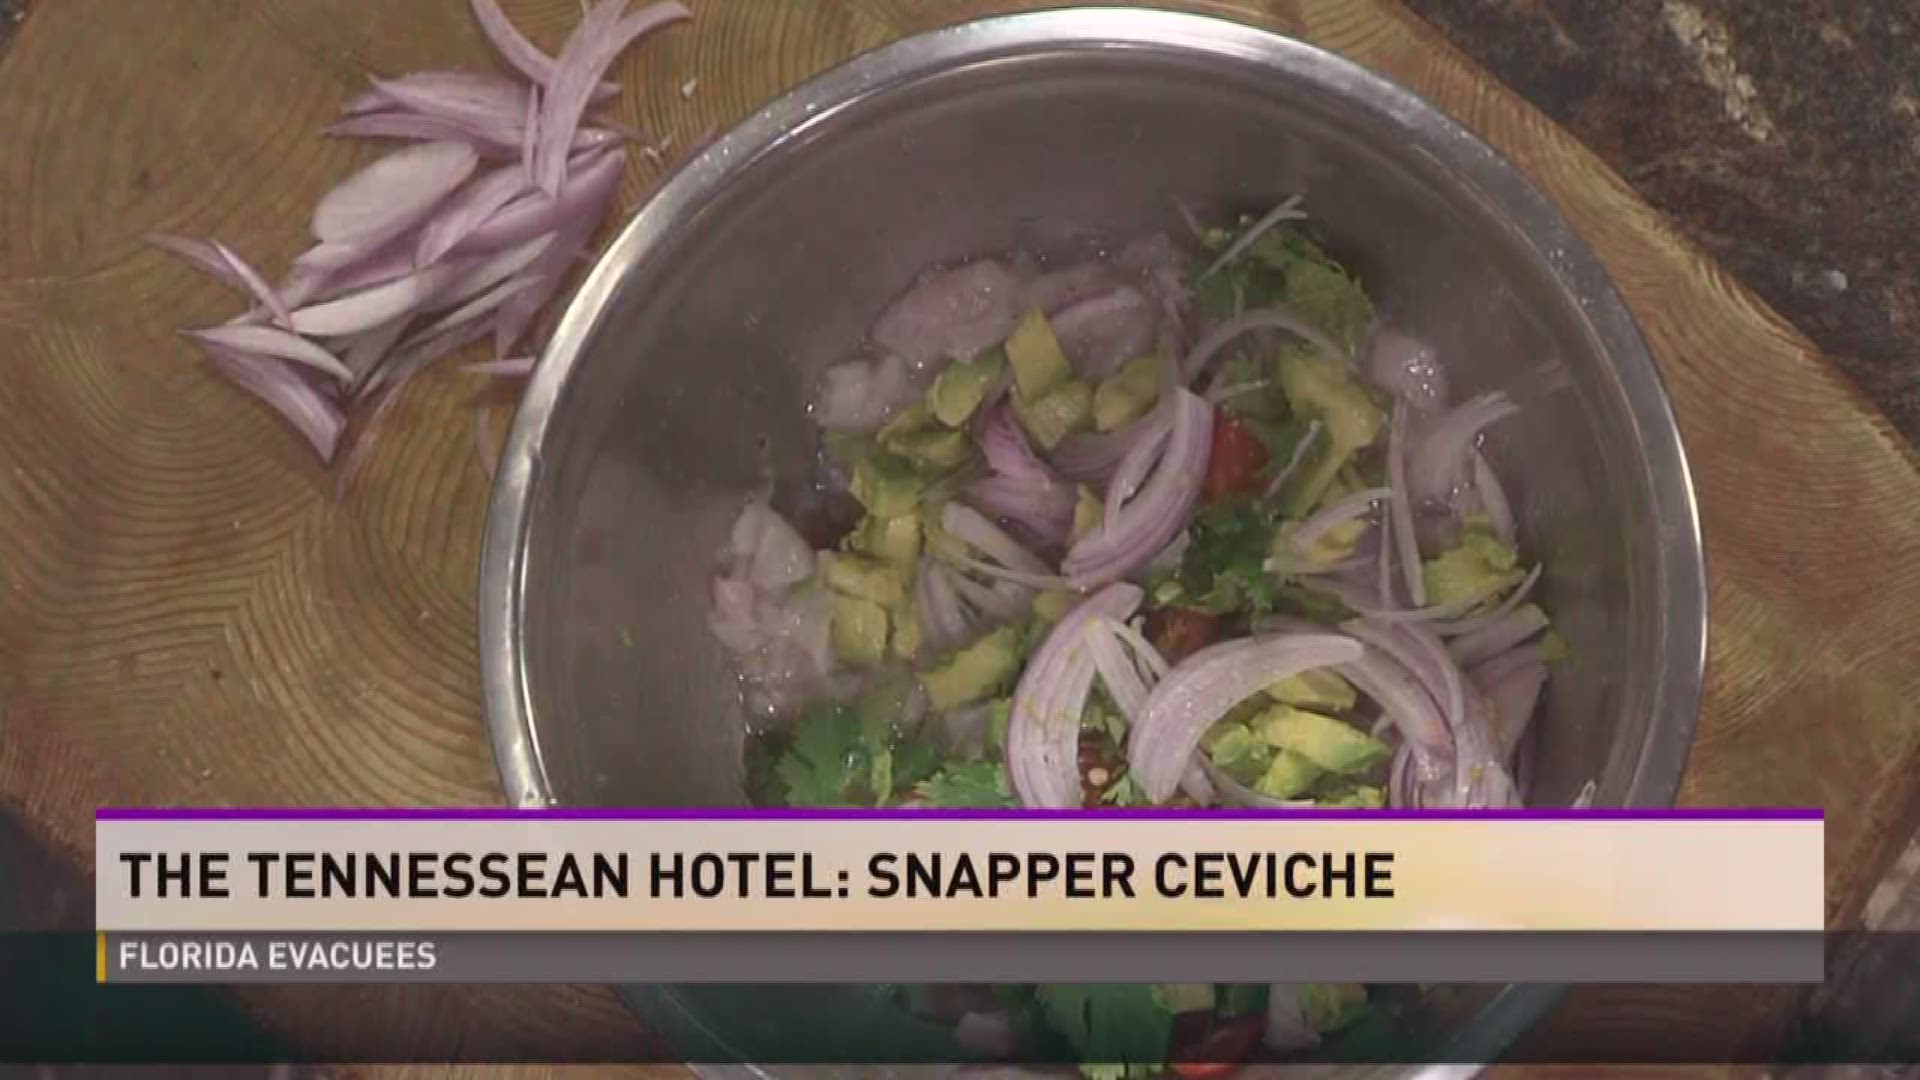 The Tennessean Hotel: Snapper Ceviche